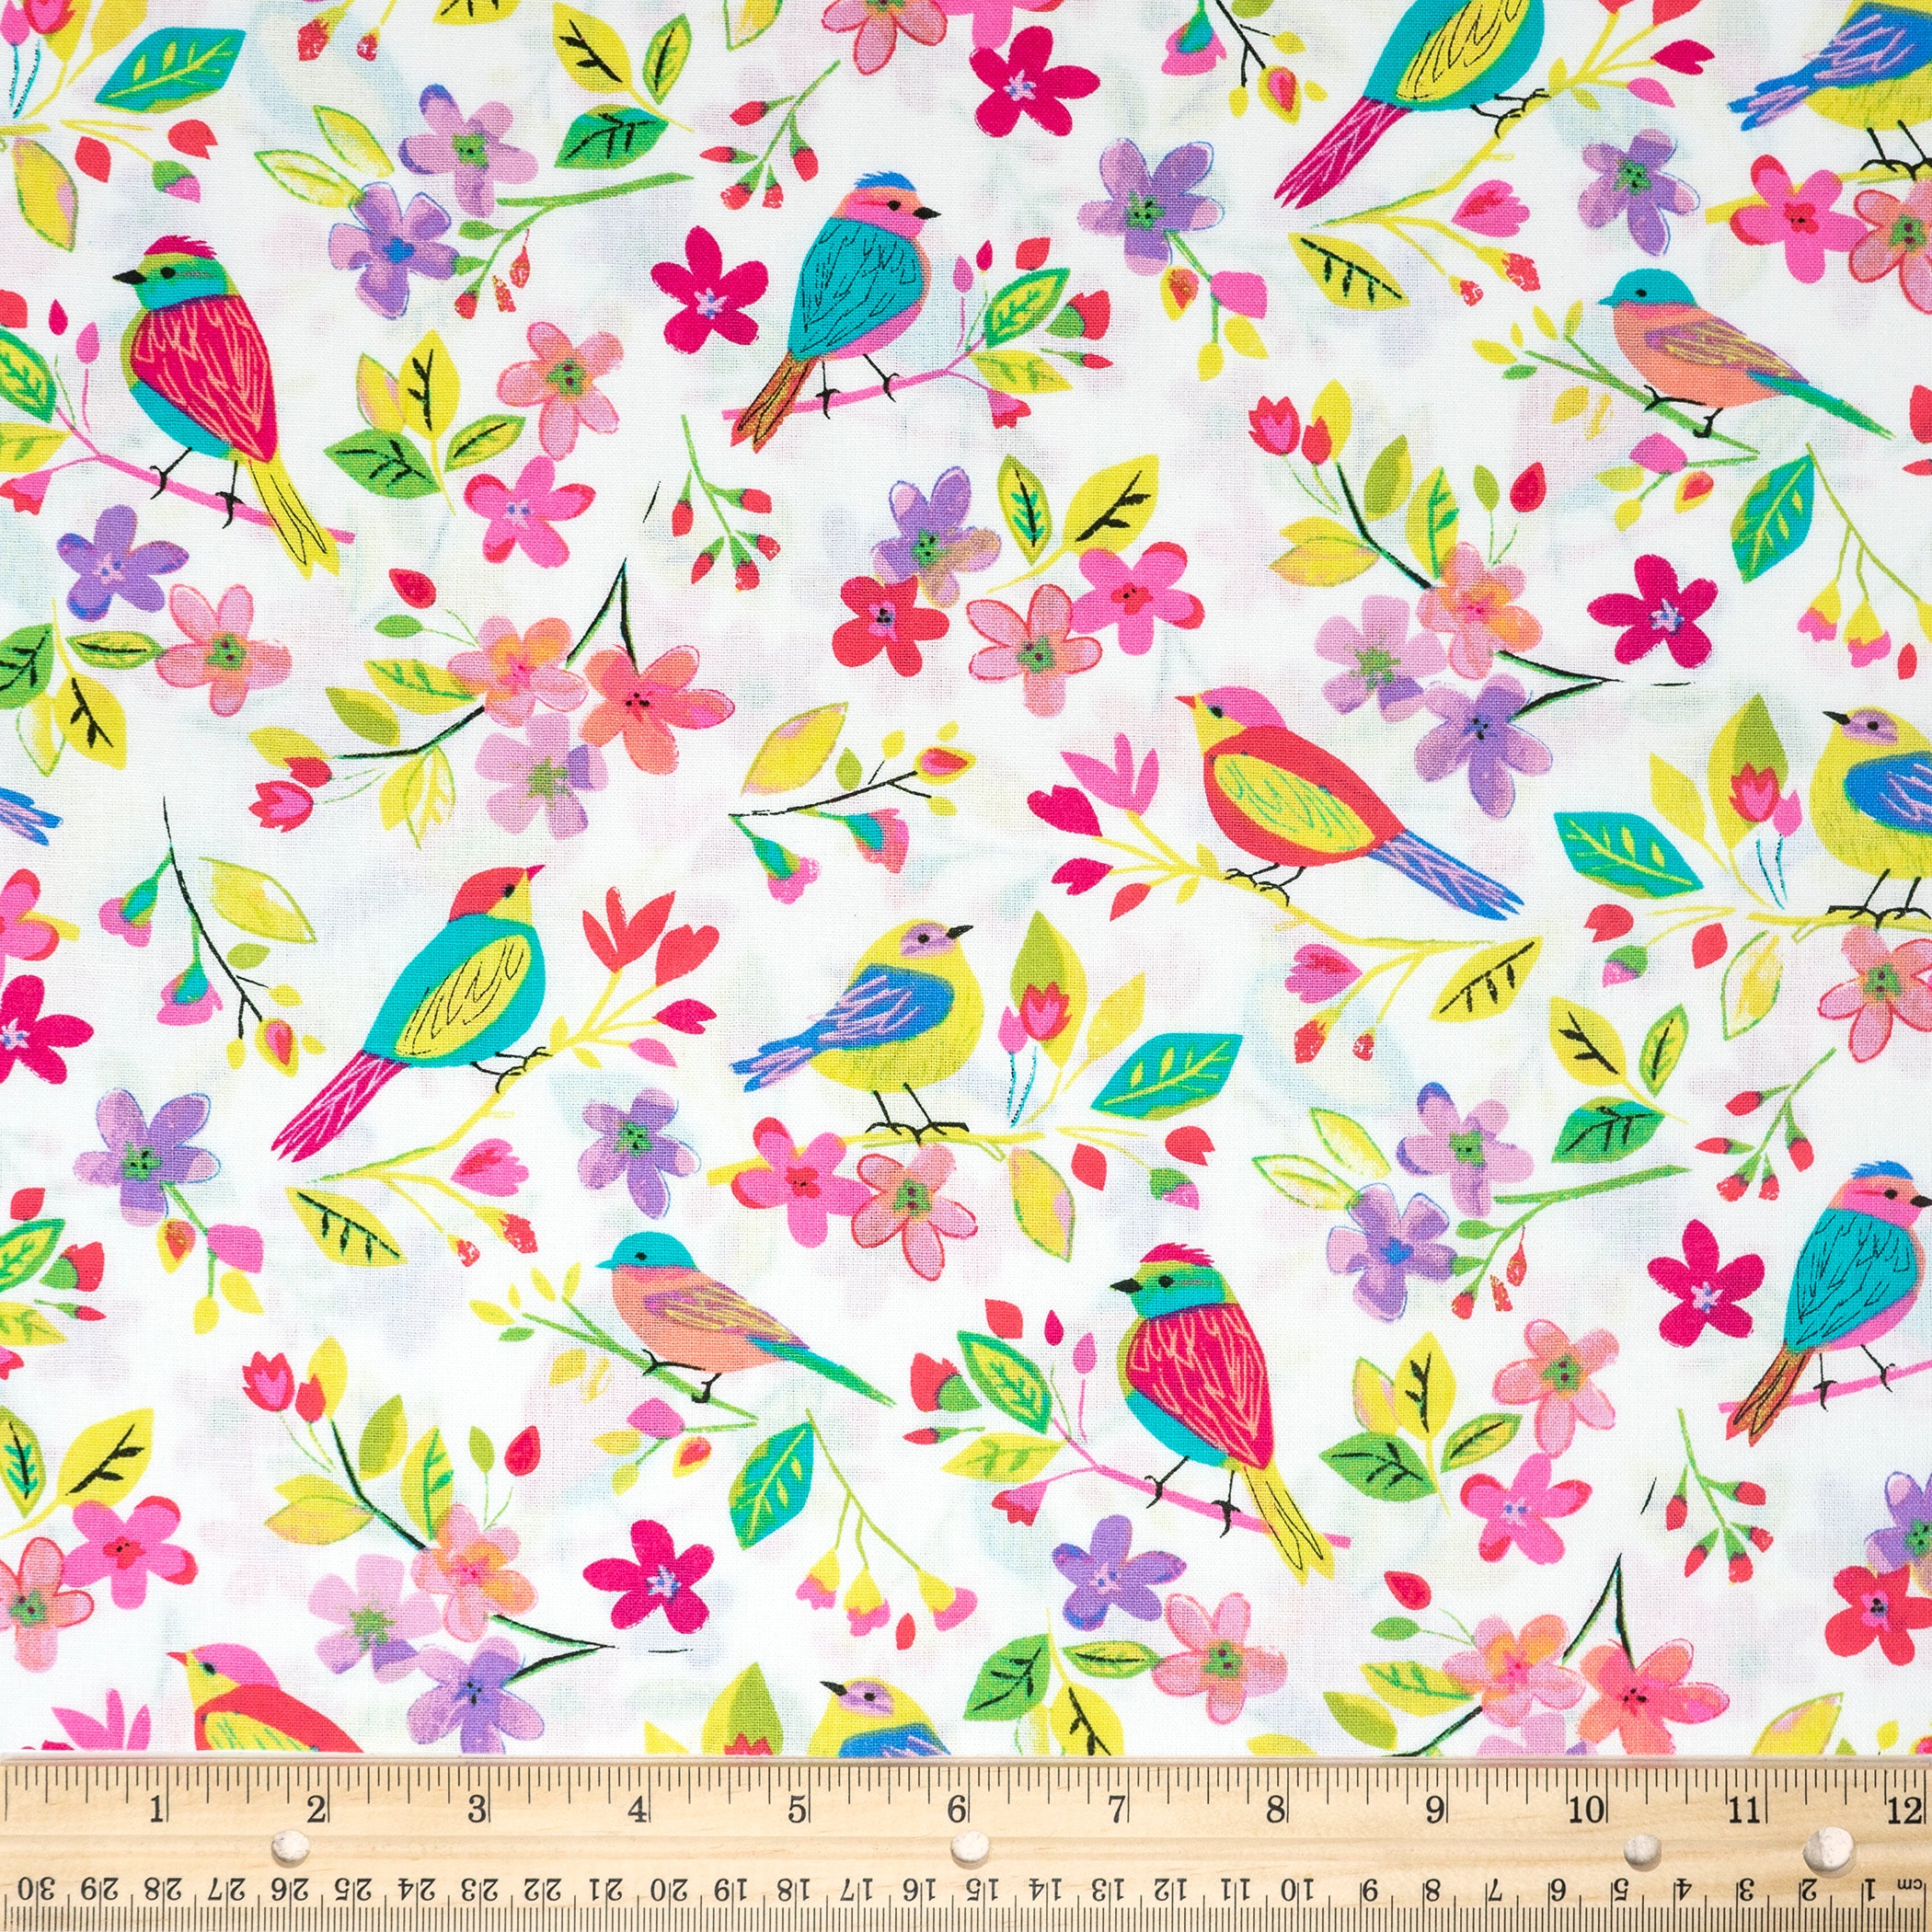 Waverly Inspirations Cotton 44" Big Bird Multicolor Sewing Fabric by the Yard